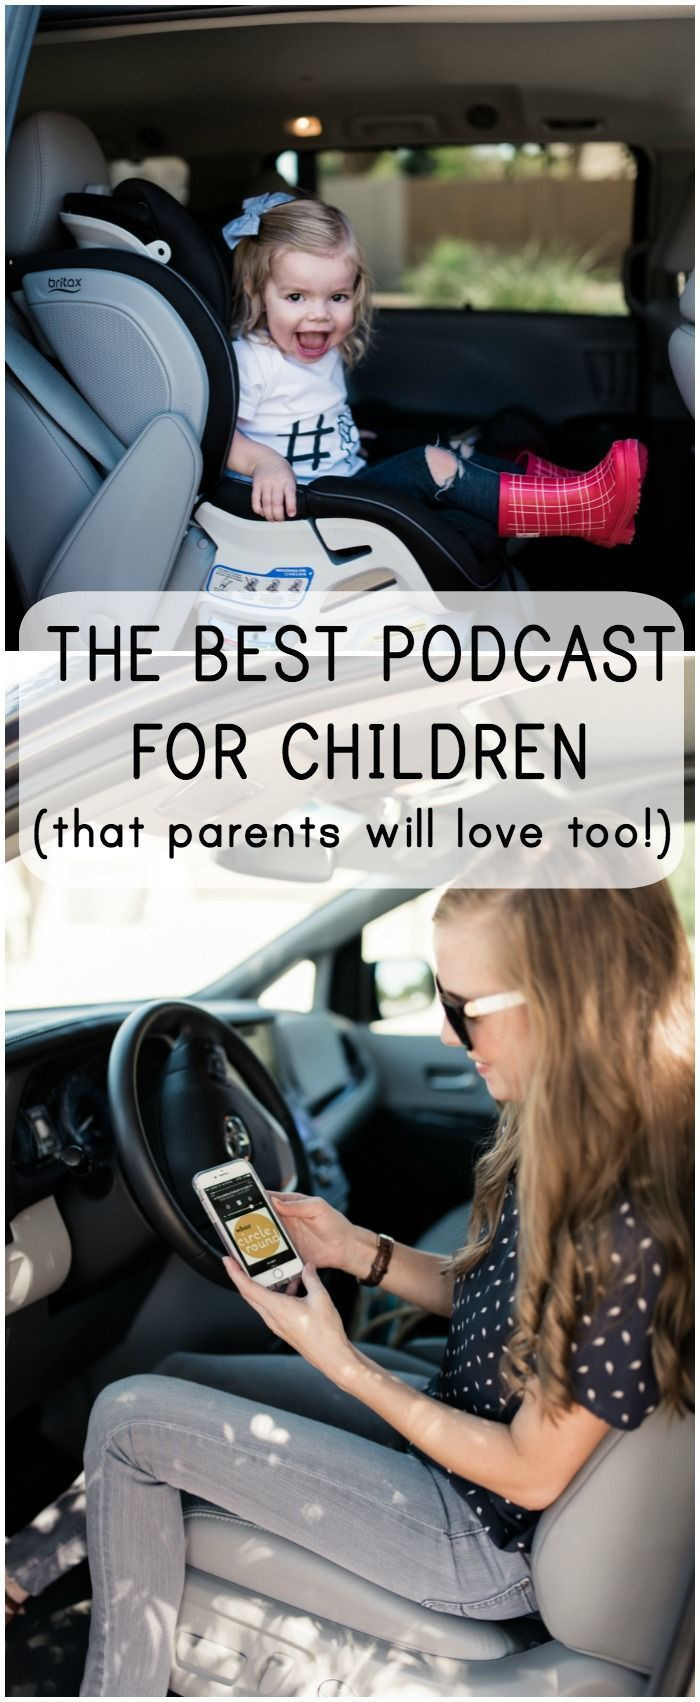 Indoor Kids Podcast
 The Best Podcasts for Kids The New Circle Round Podcast